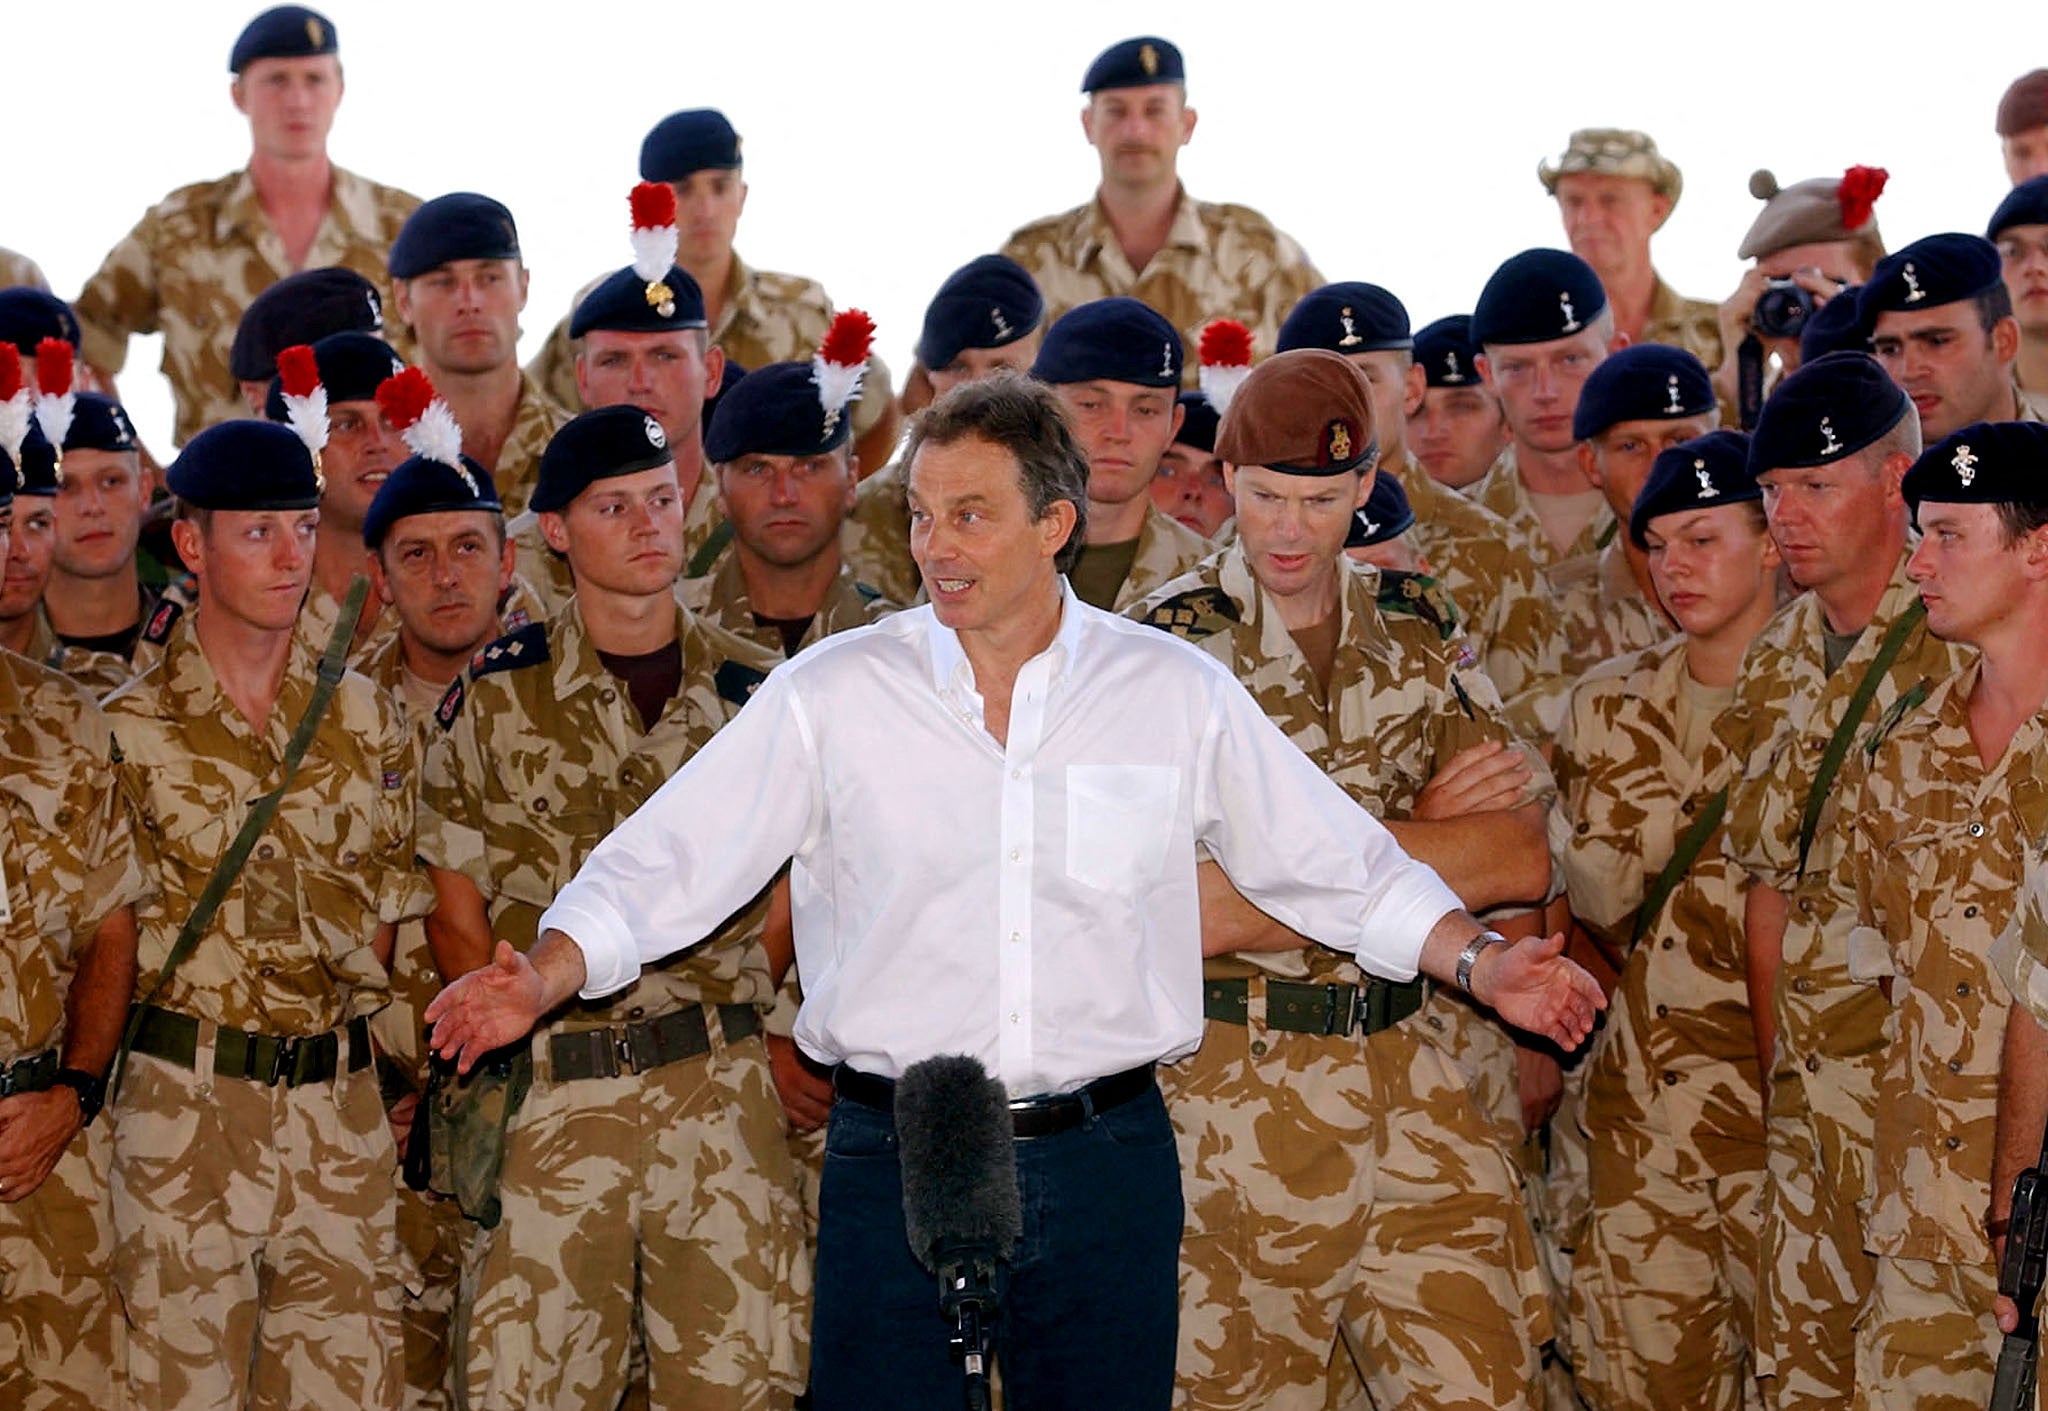 Britain's prime minister at the time Tony Blair addresses British troops in Basra, southern Iraq, May 29, 2003